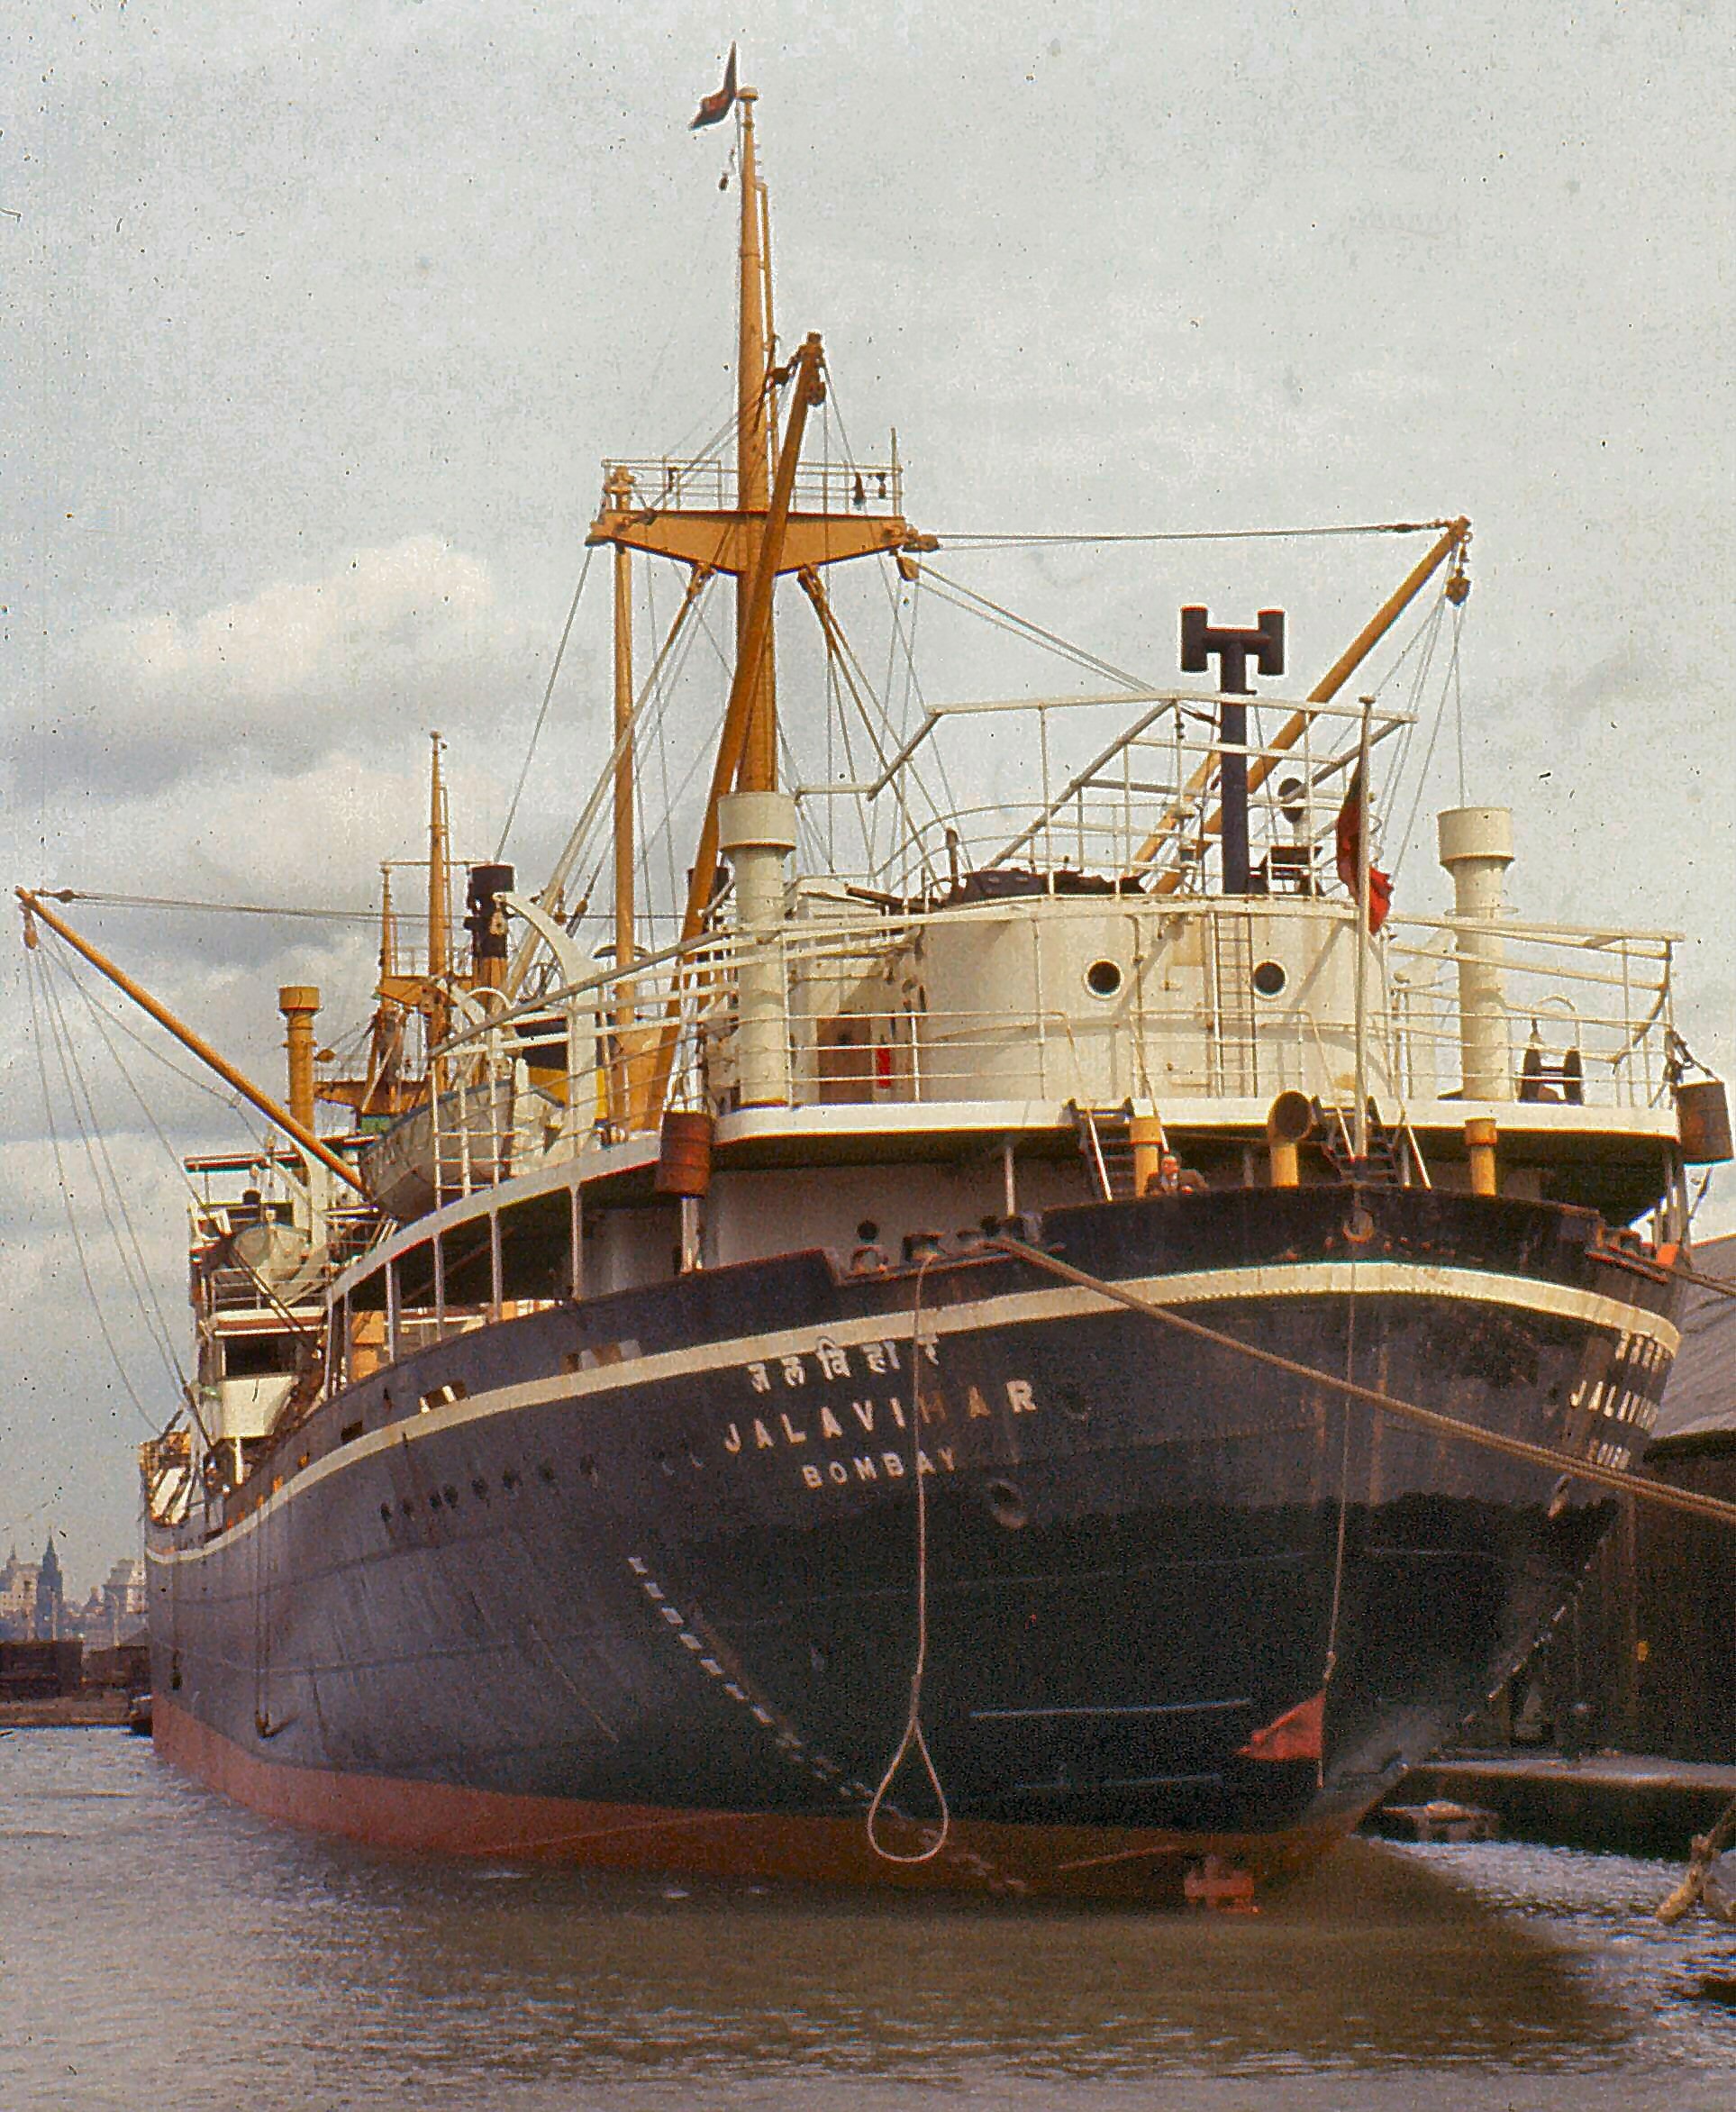 A ship from Bombay in India photograoed in the town in April 1965 (Image: Eddie Whitham)